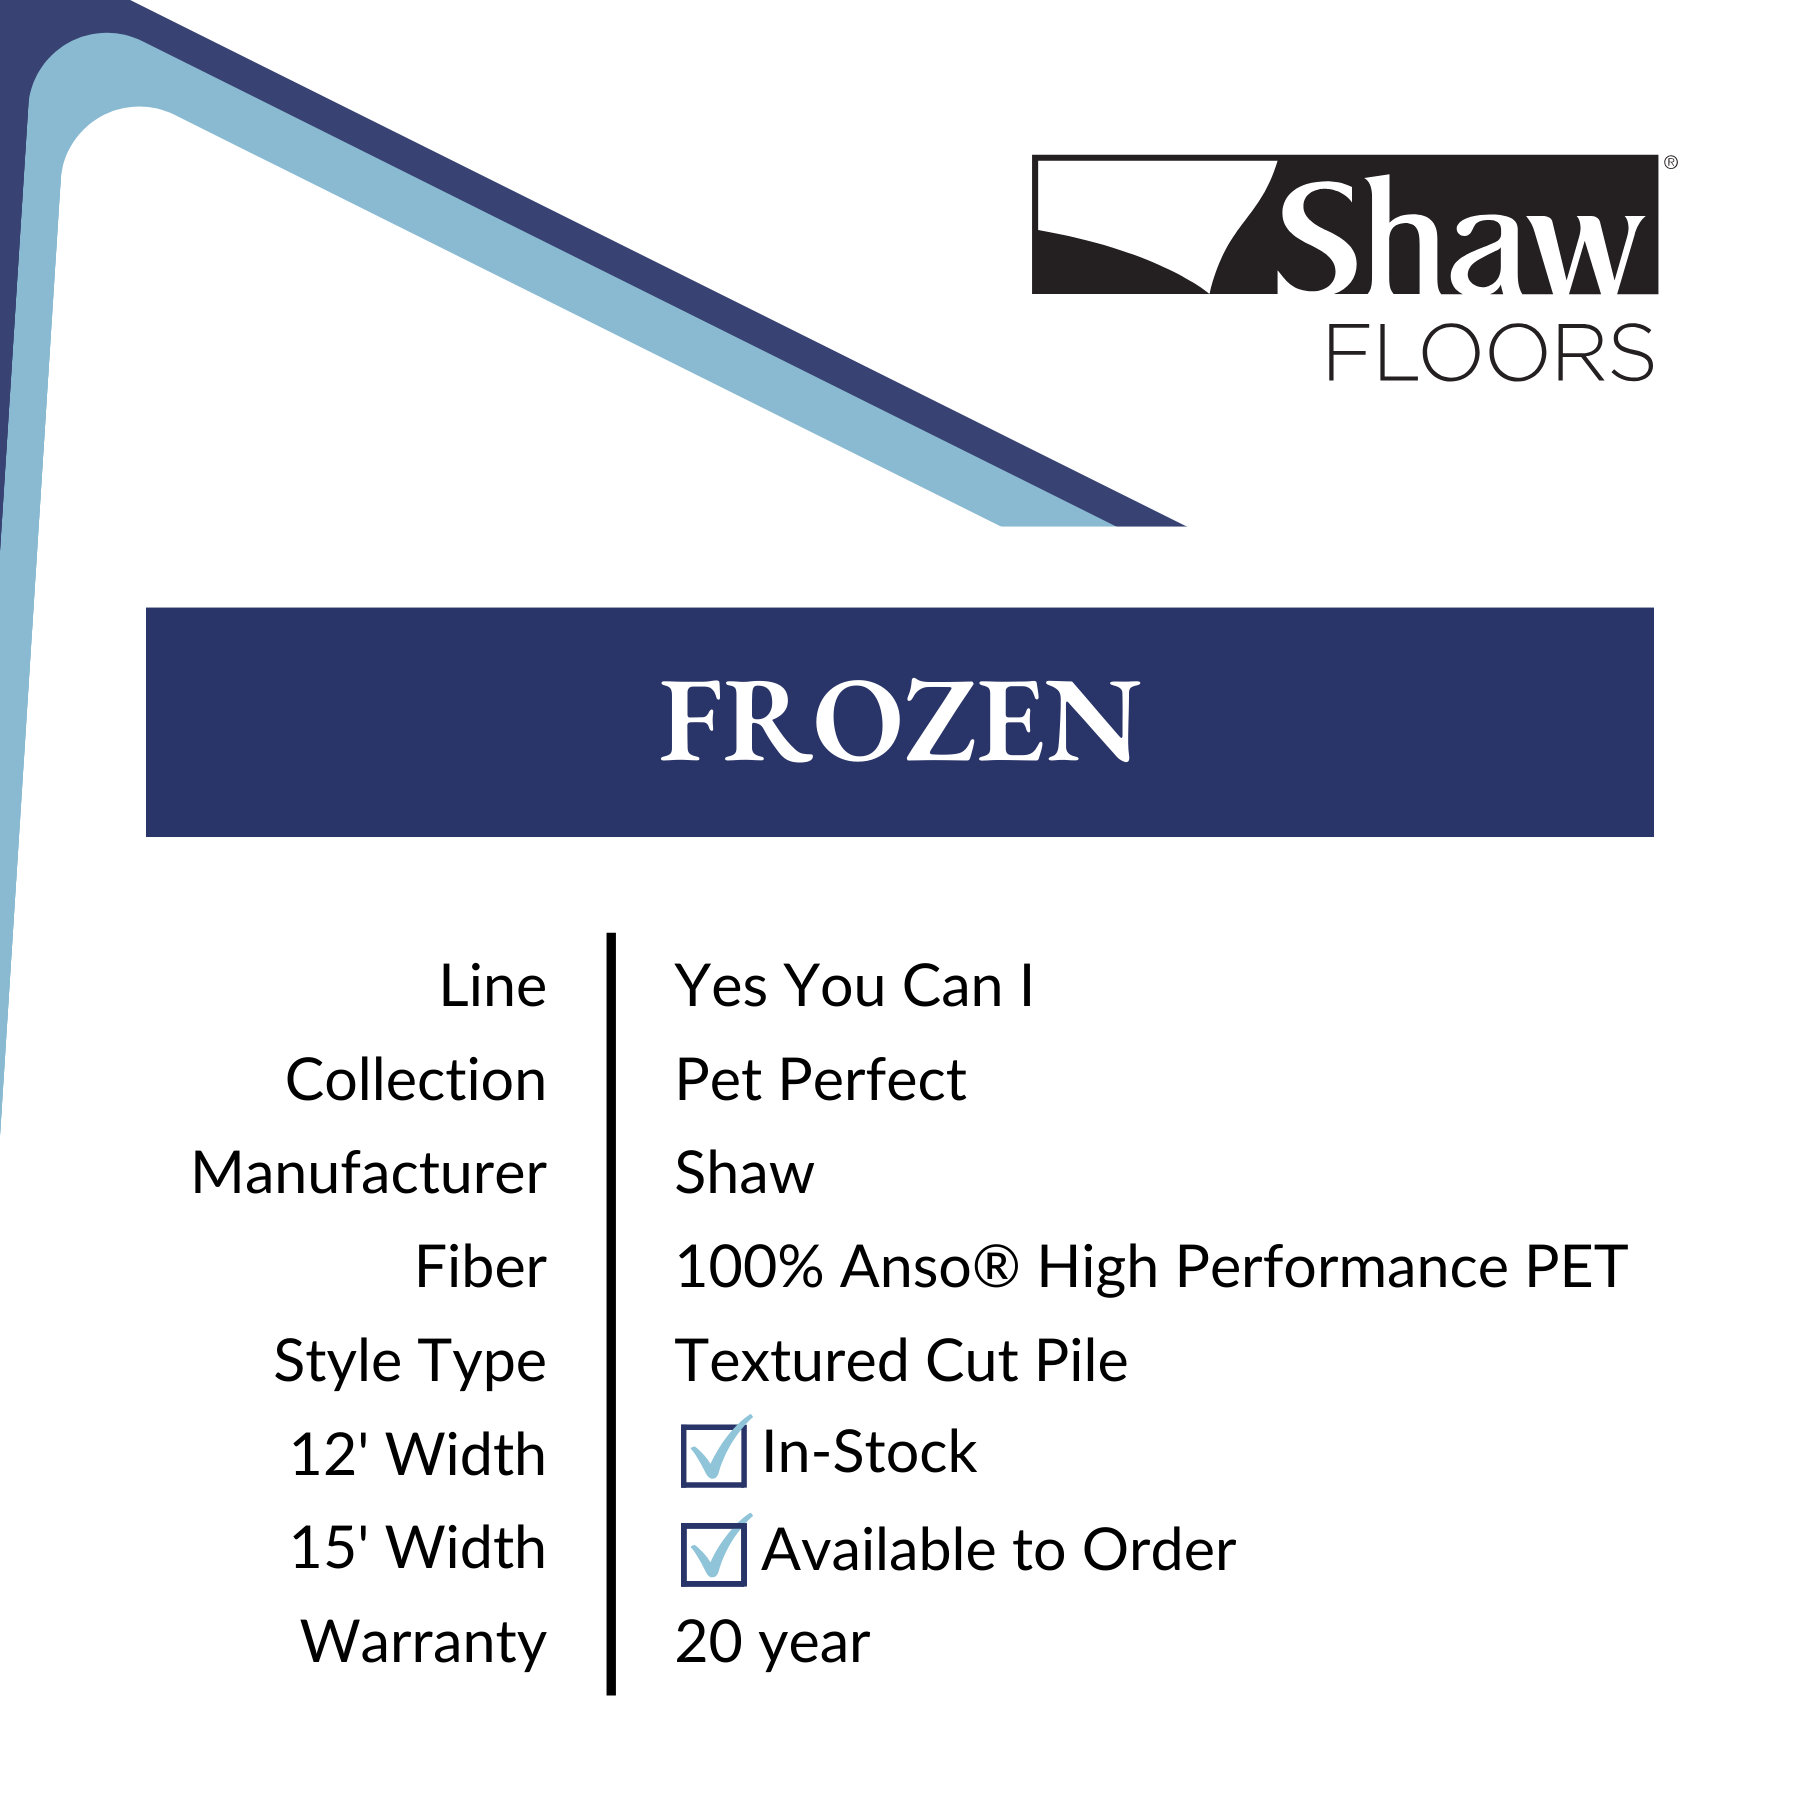 Frozen Shaw Pet Perfect Plus Yes You Can I Carpet from Calhoun's Flooring Springfield IL Specs